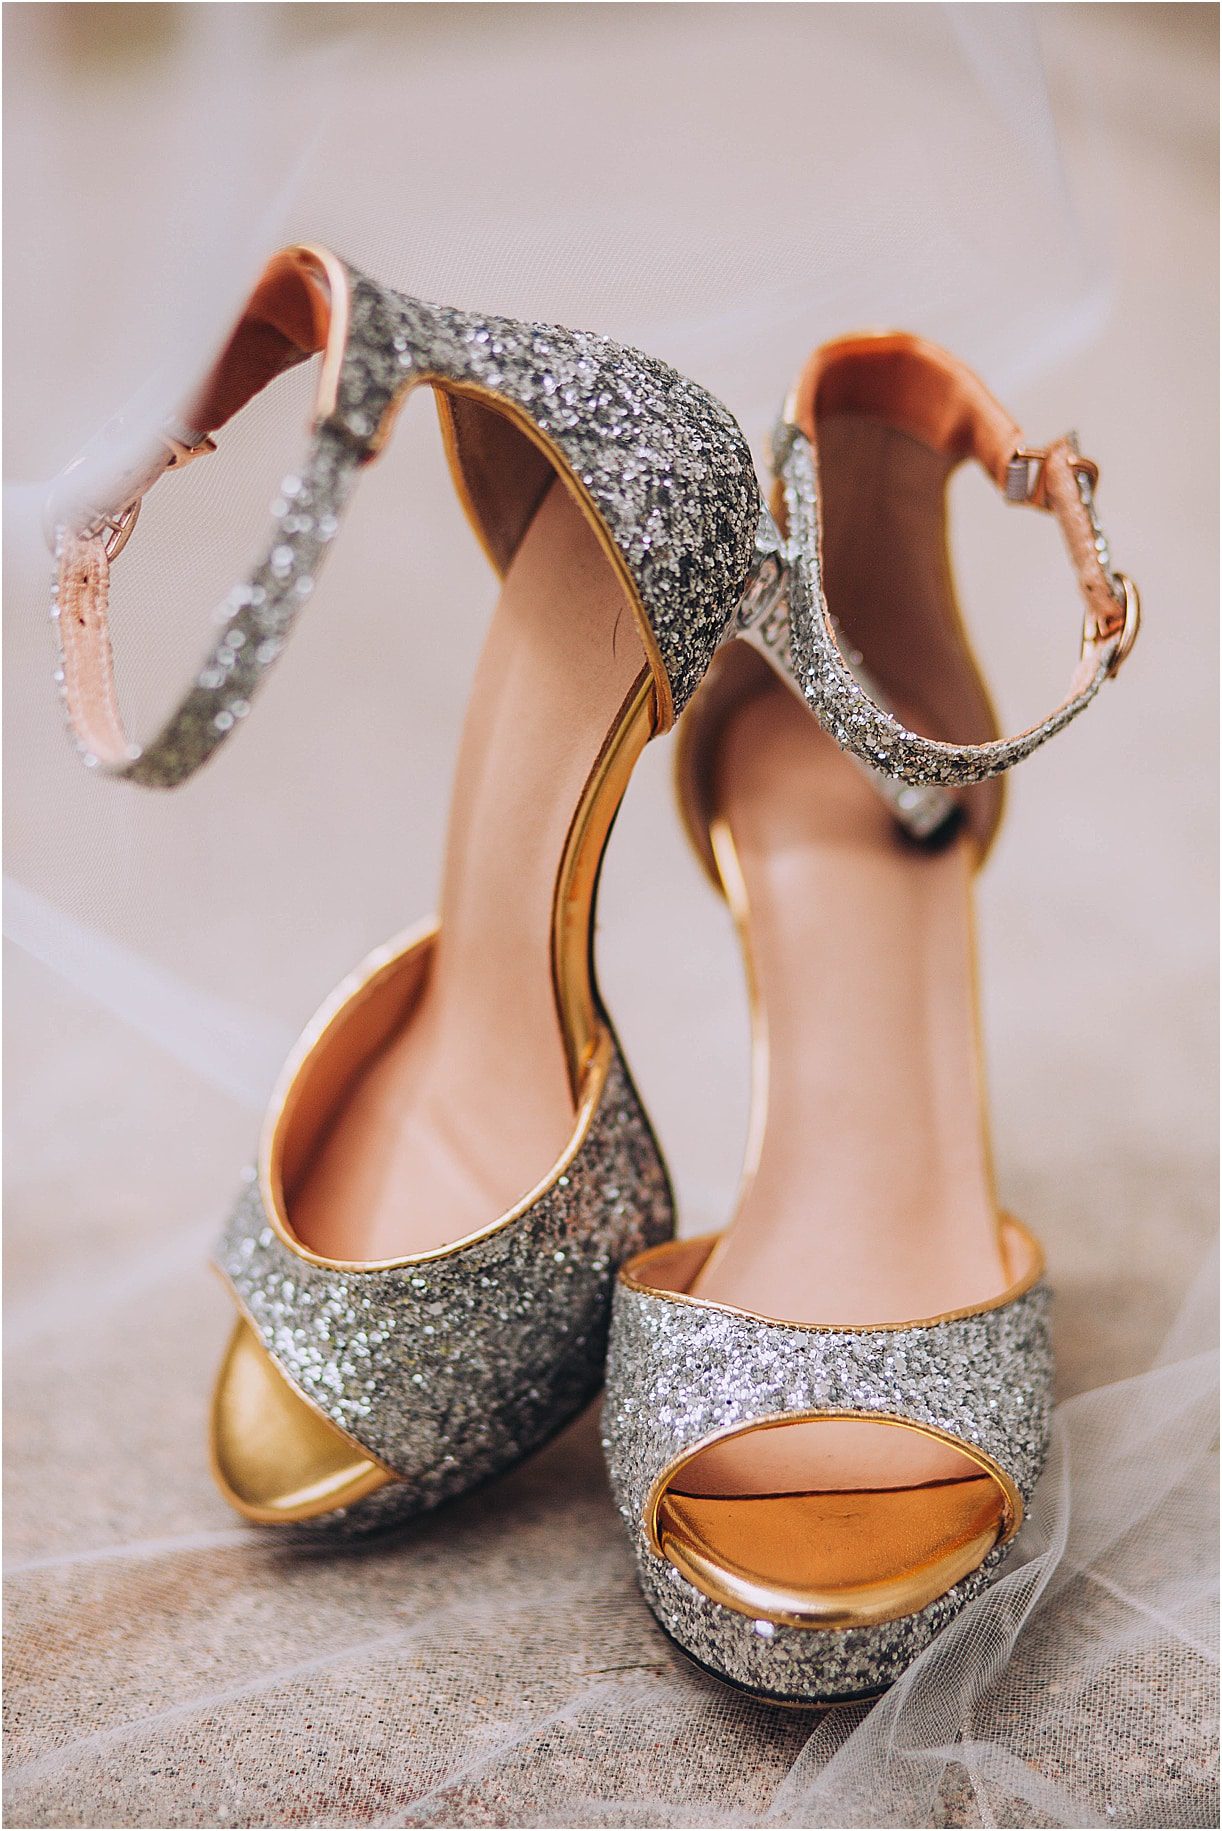 Intimate Ceremony During Covid-19 | Hill City Bride Virginia Weddings Bridal Shoes